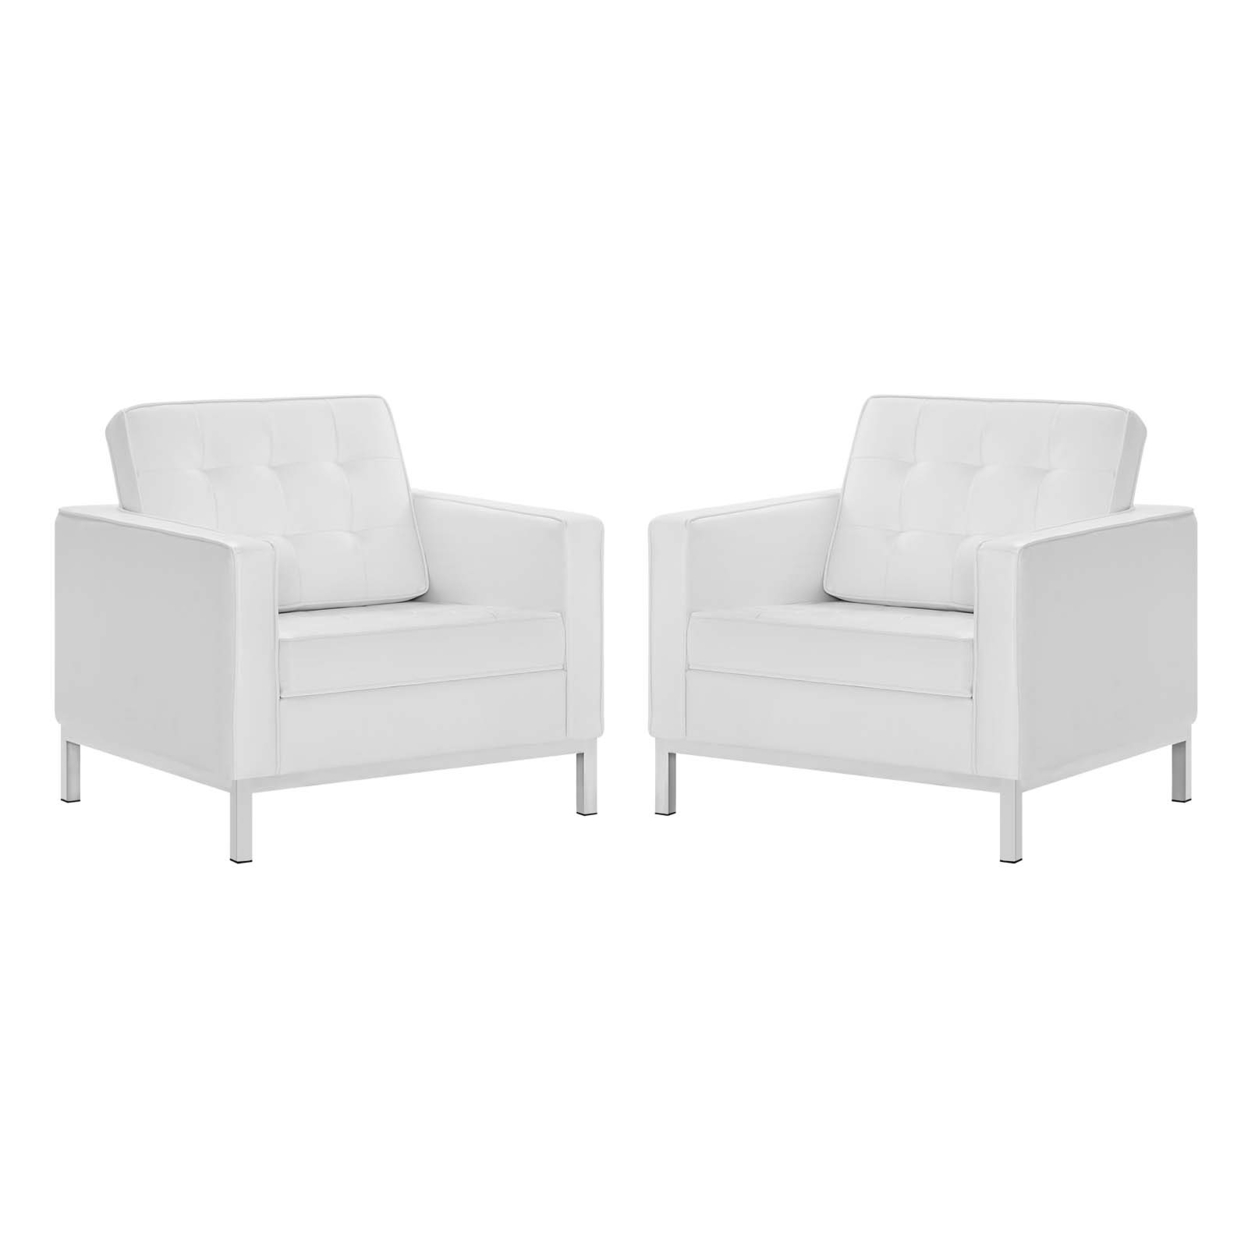 Loft Tufted Upholstered Faux Leather Armchair Set Of 2, Silver White